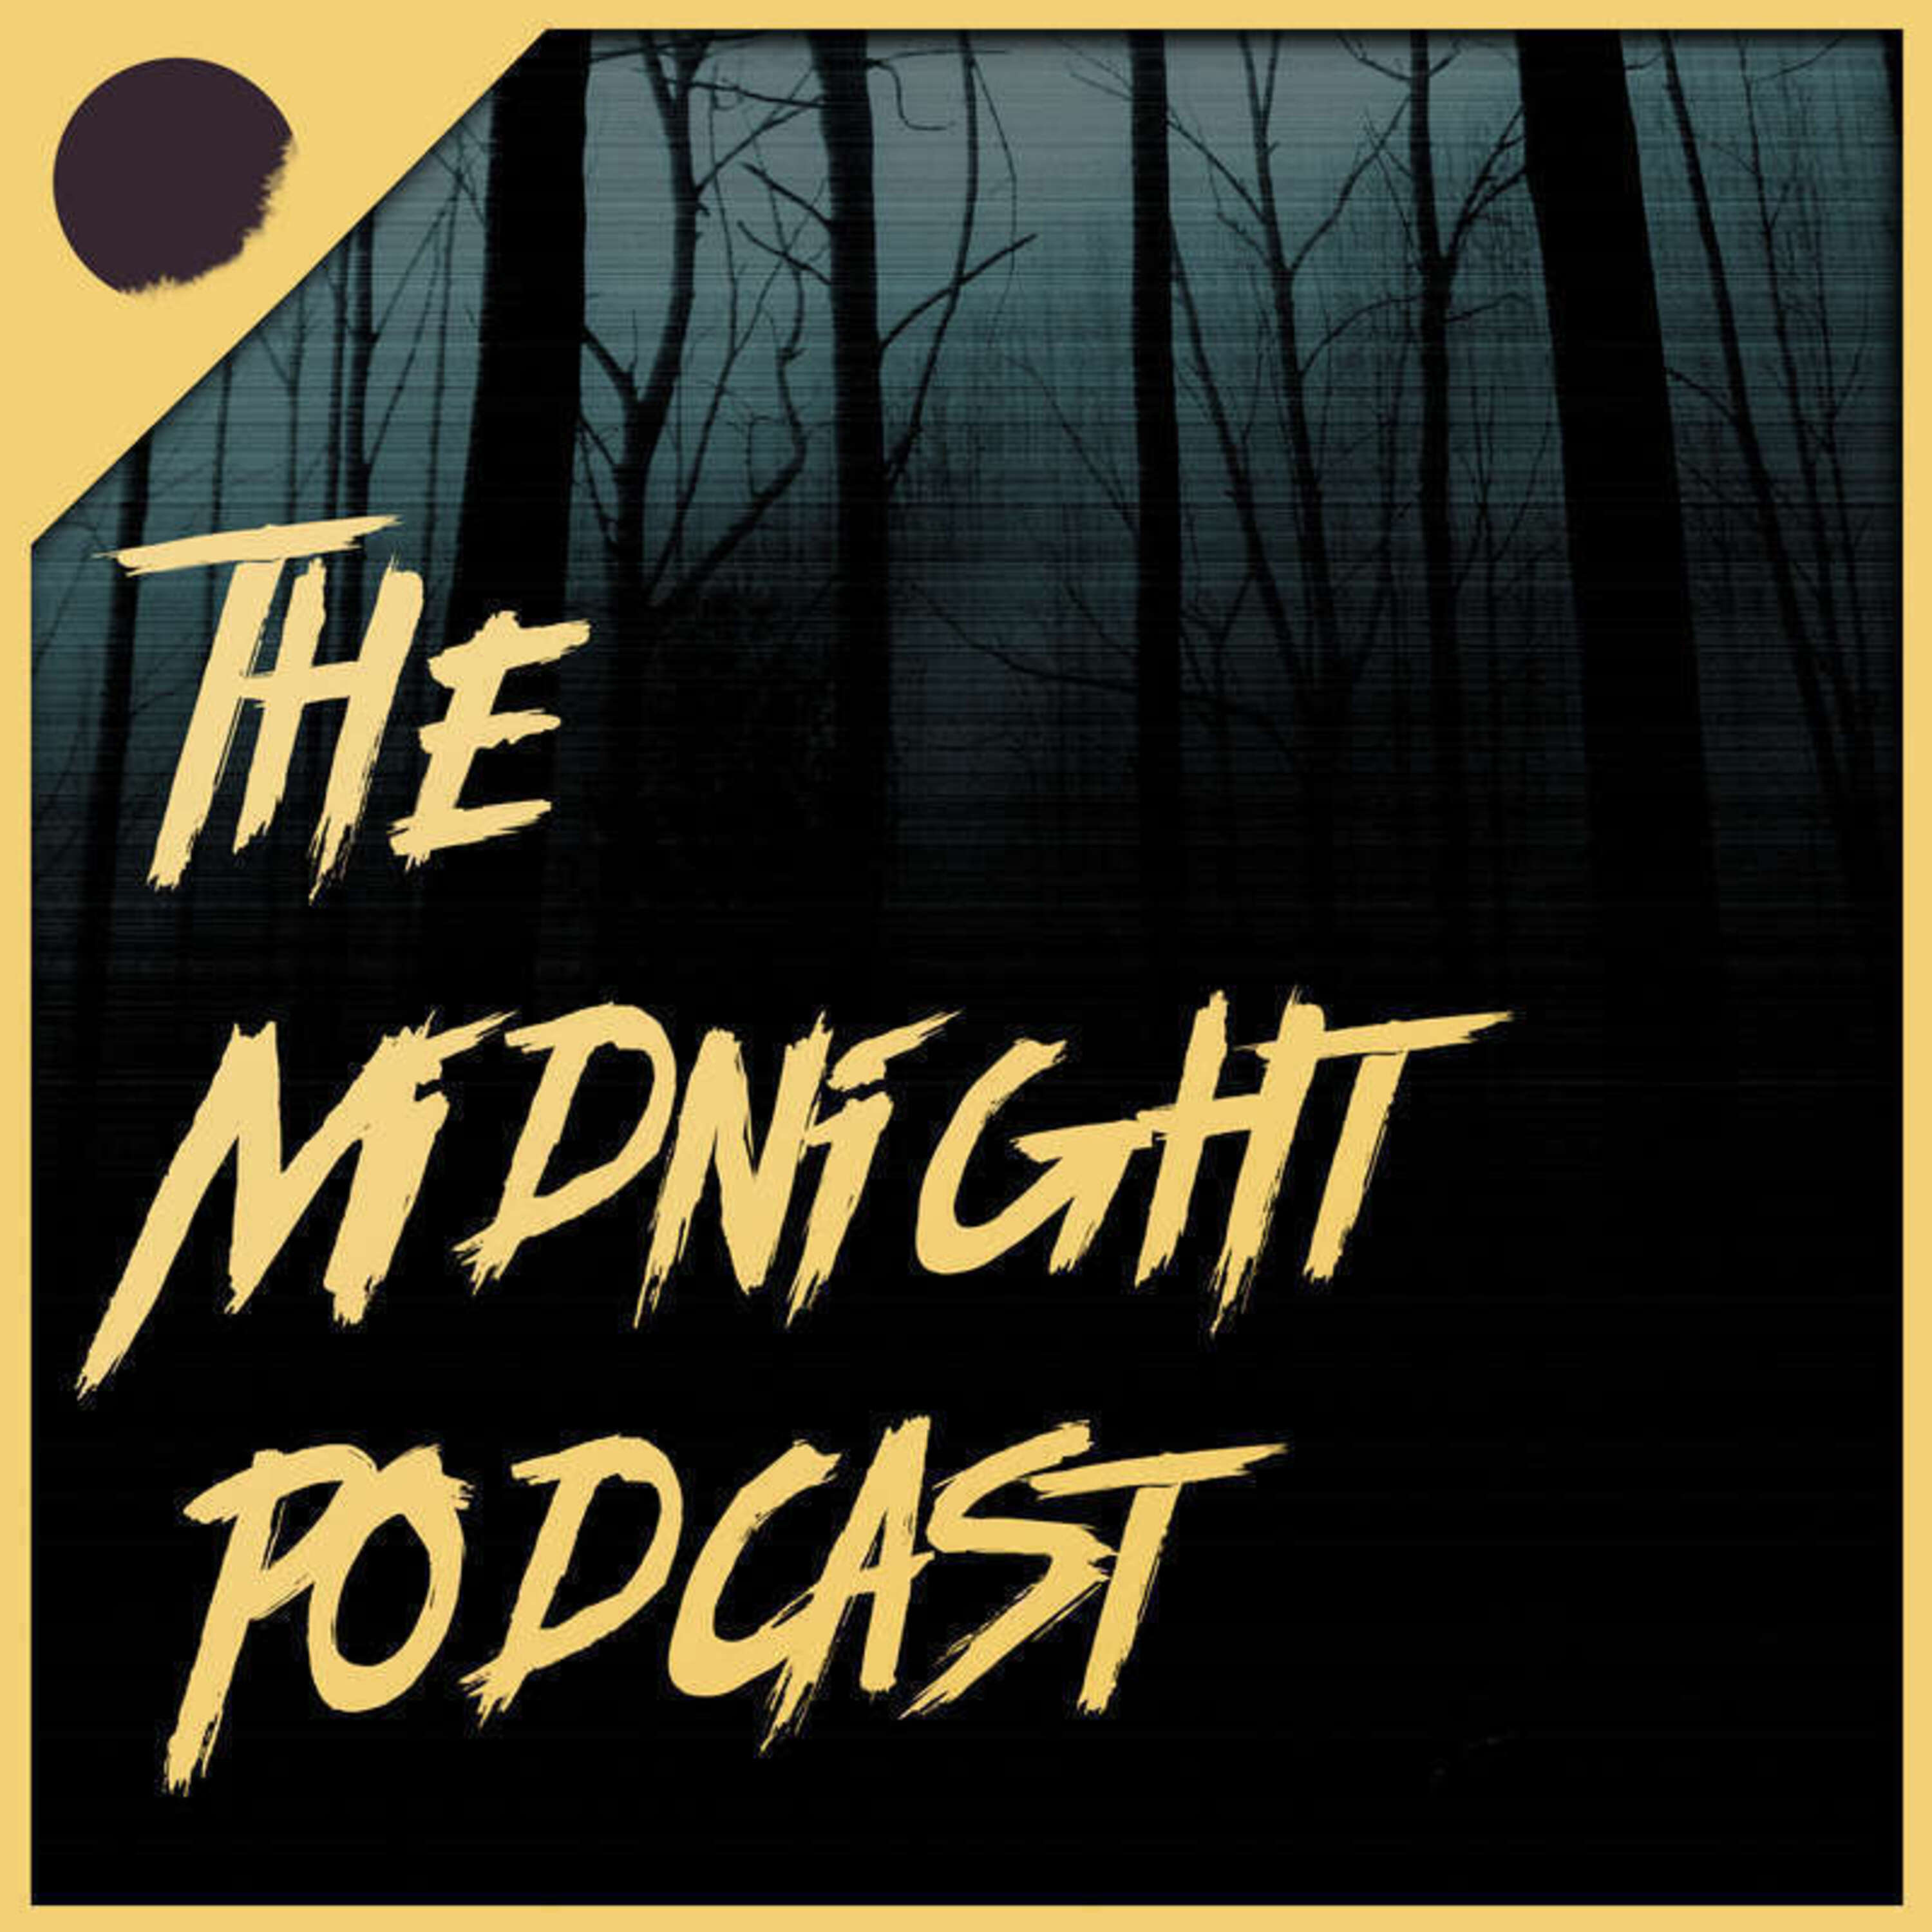 Episode 129 | There's a strange newspaper that's only delivered at midnight | Part 14